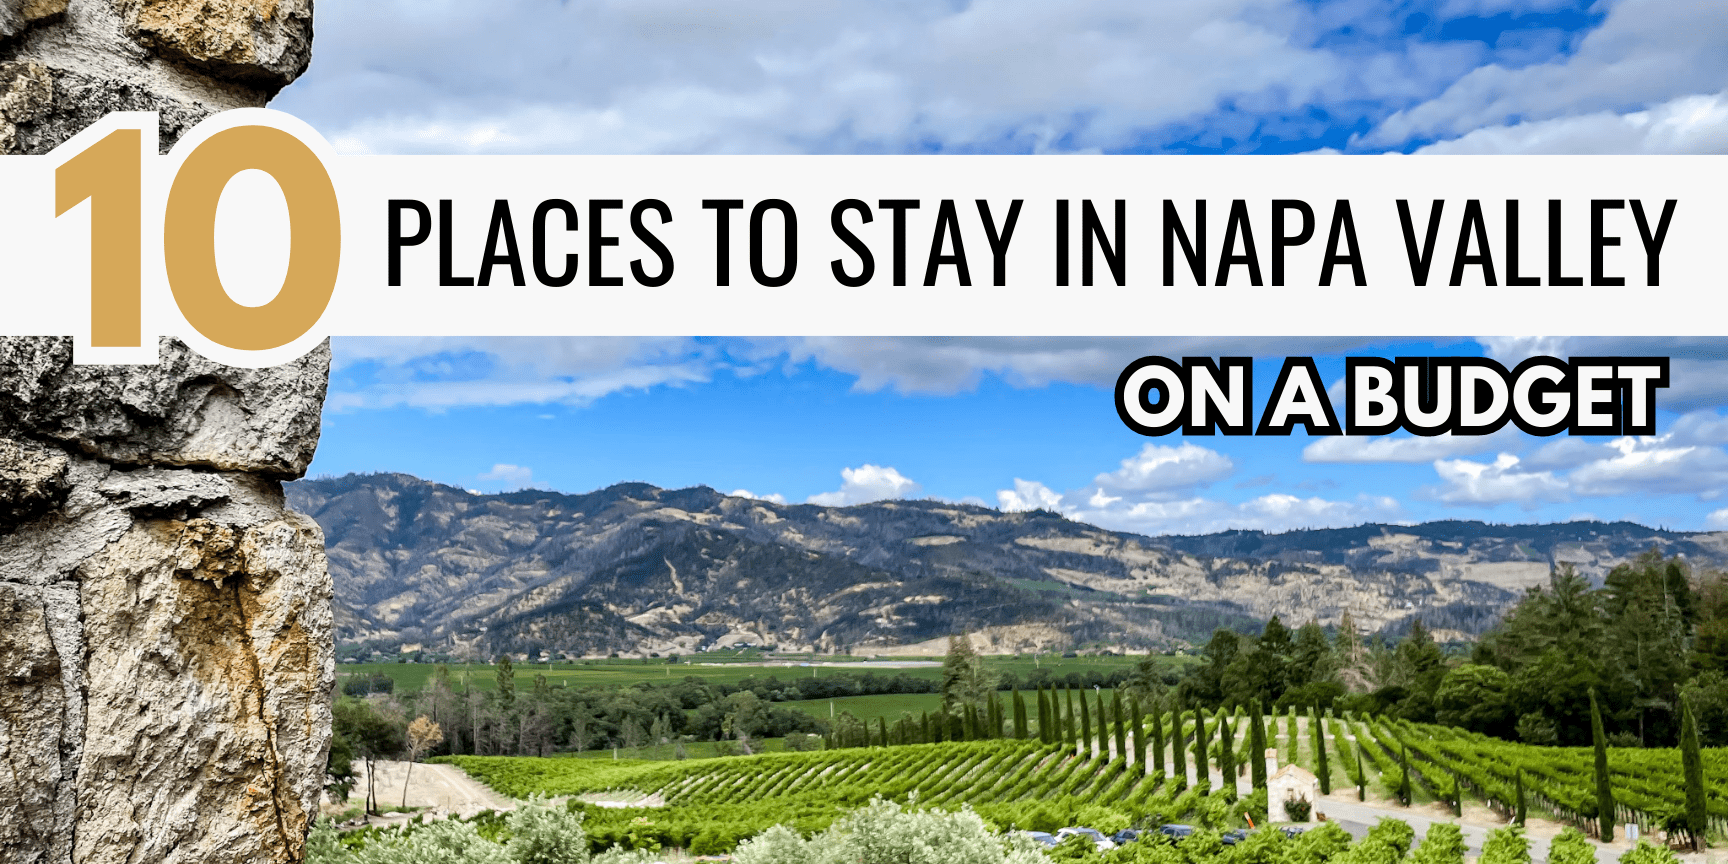 10 Places to Stay in Napa Valley on a Budget with vineyard scenery